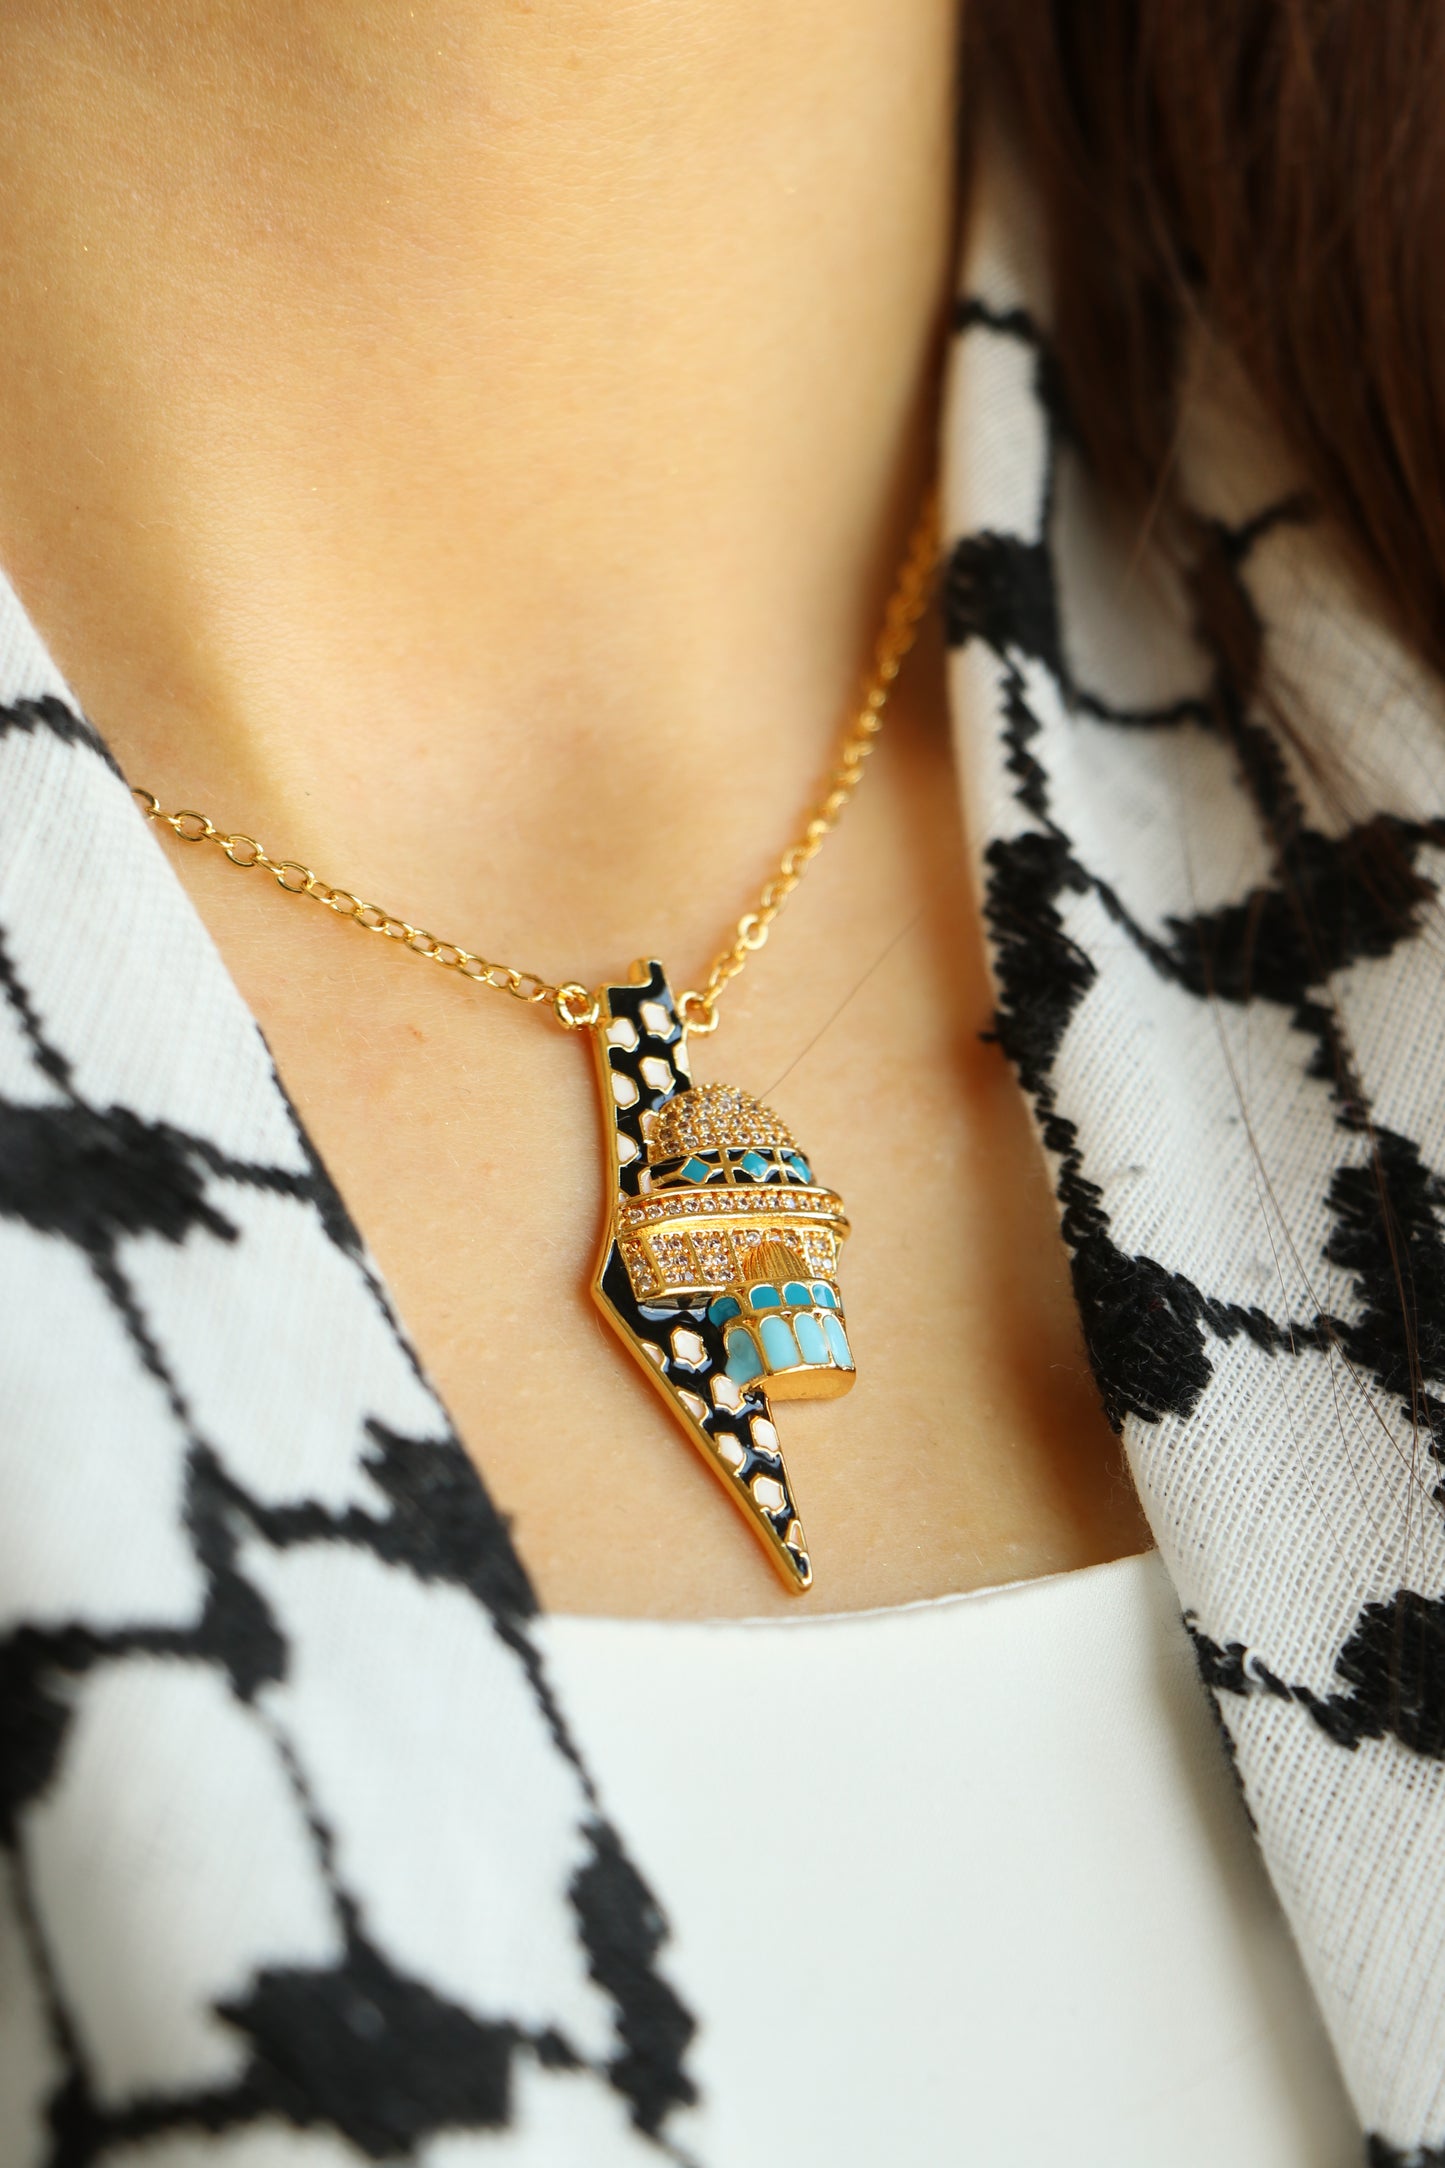 Luxury Golden Zircon Country Map and Al-Aqsa Mosque by Palestinian keffiyeh colors - Pendant Necklace